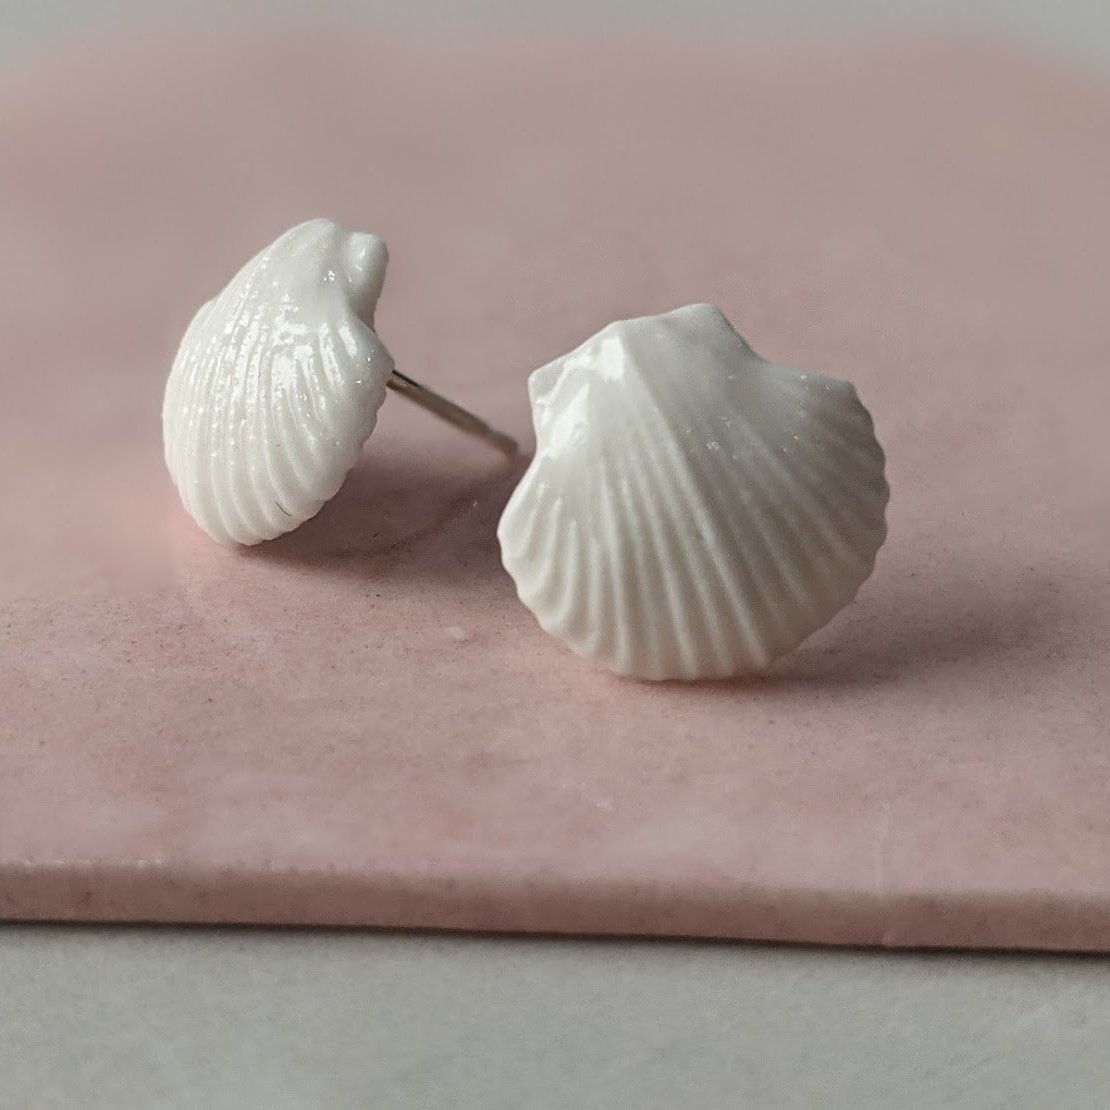 Porcelain White Scallop Shell Stud Earrings with Sterling Silver Stud  backs, made in Cornwall, UK — Rach Richardson Jewellery